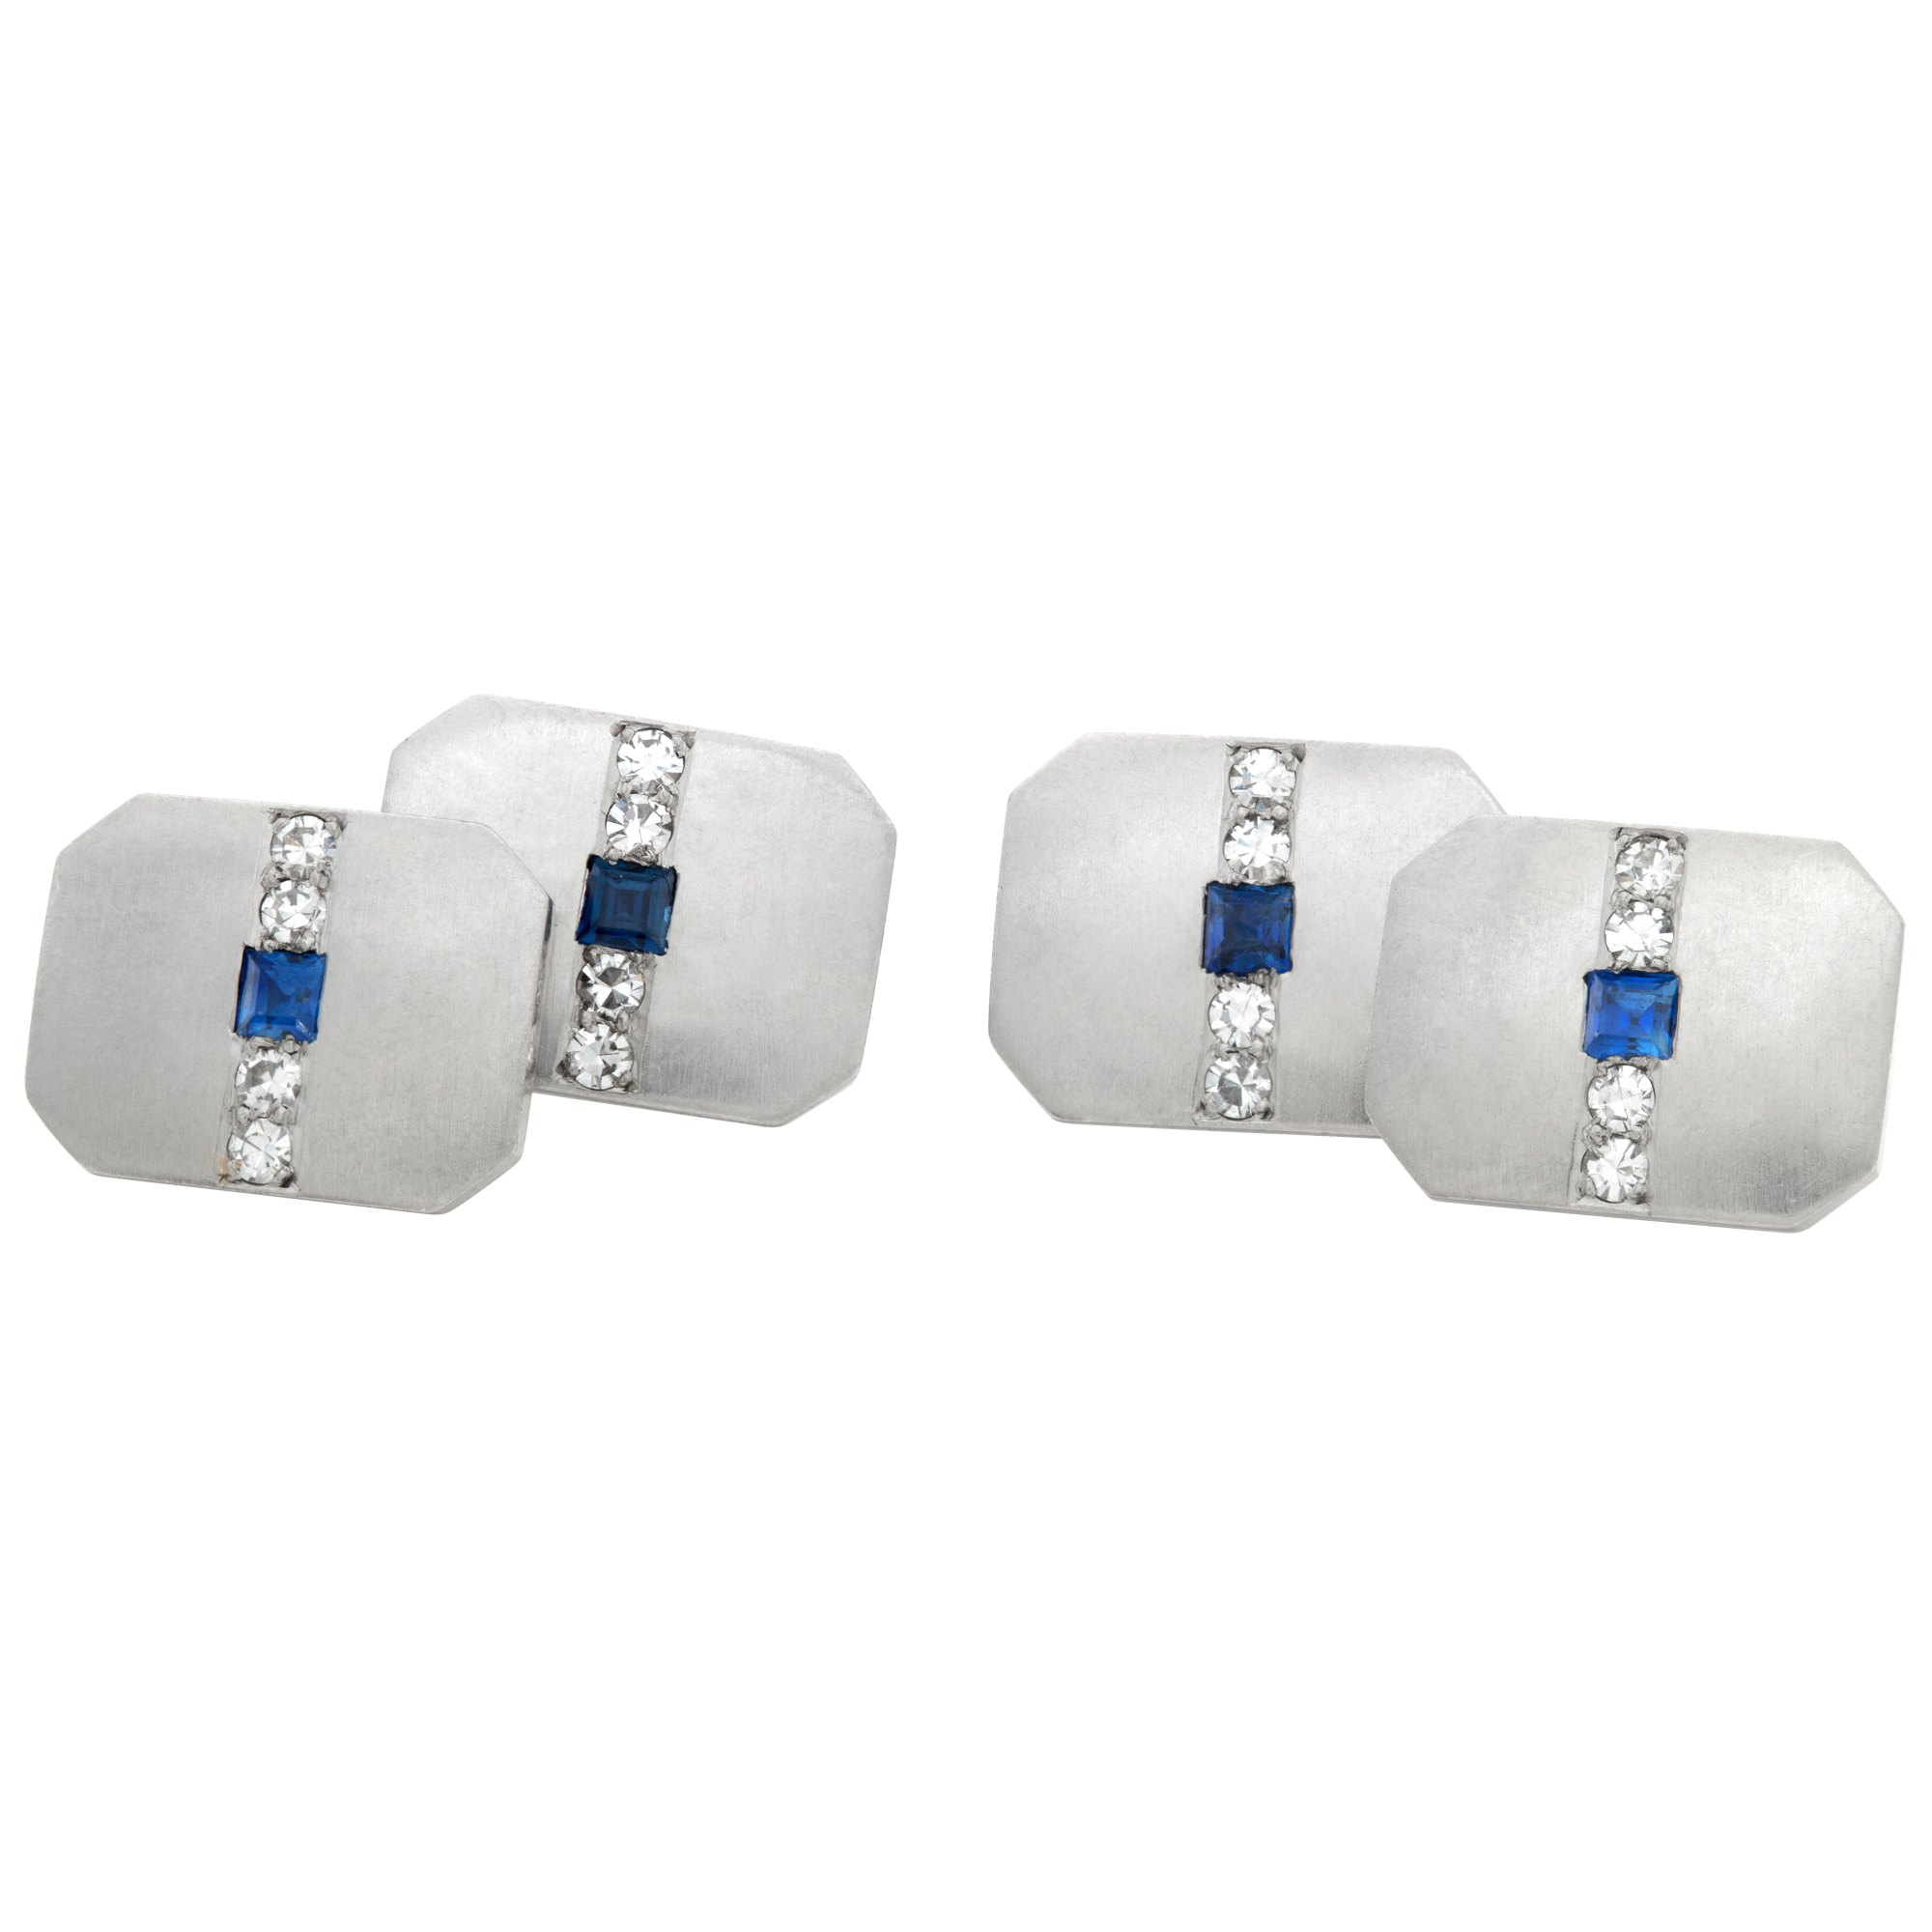 Platinum cufflinks with diamond and sapphire accents image 1